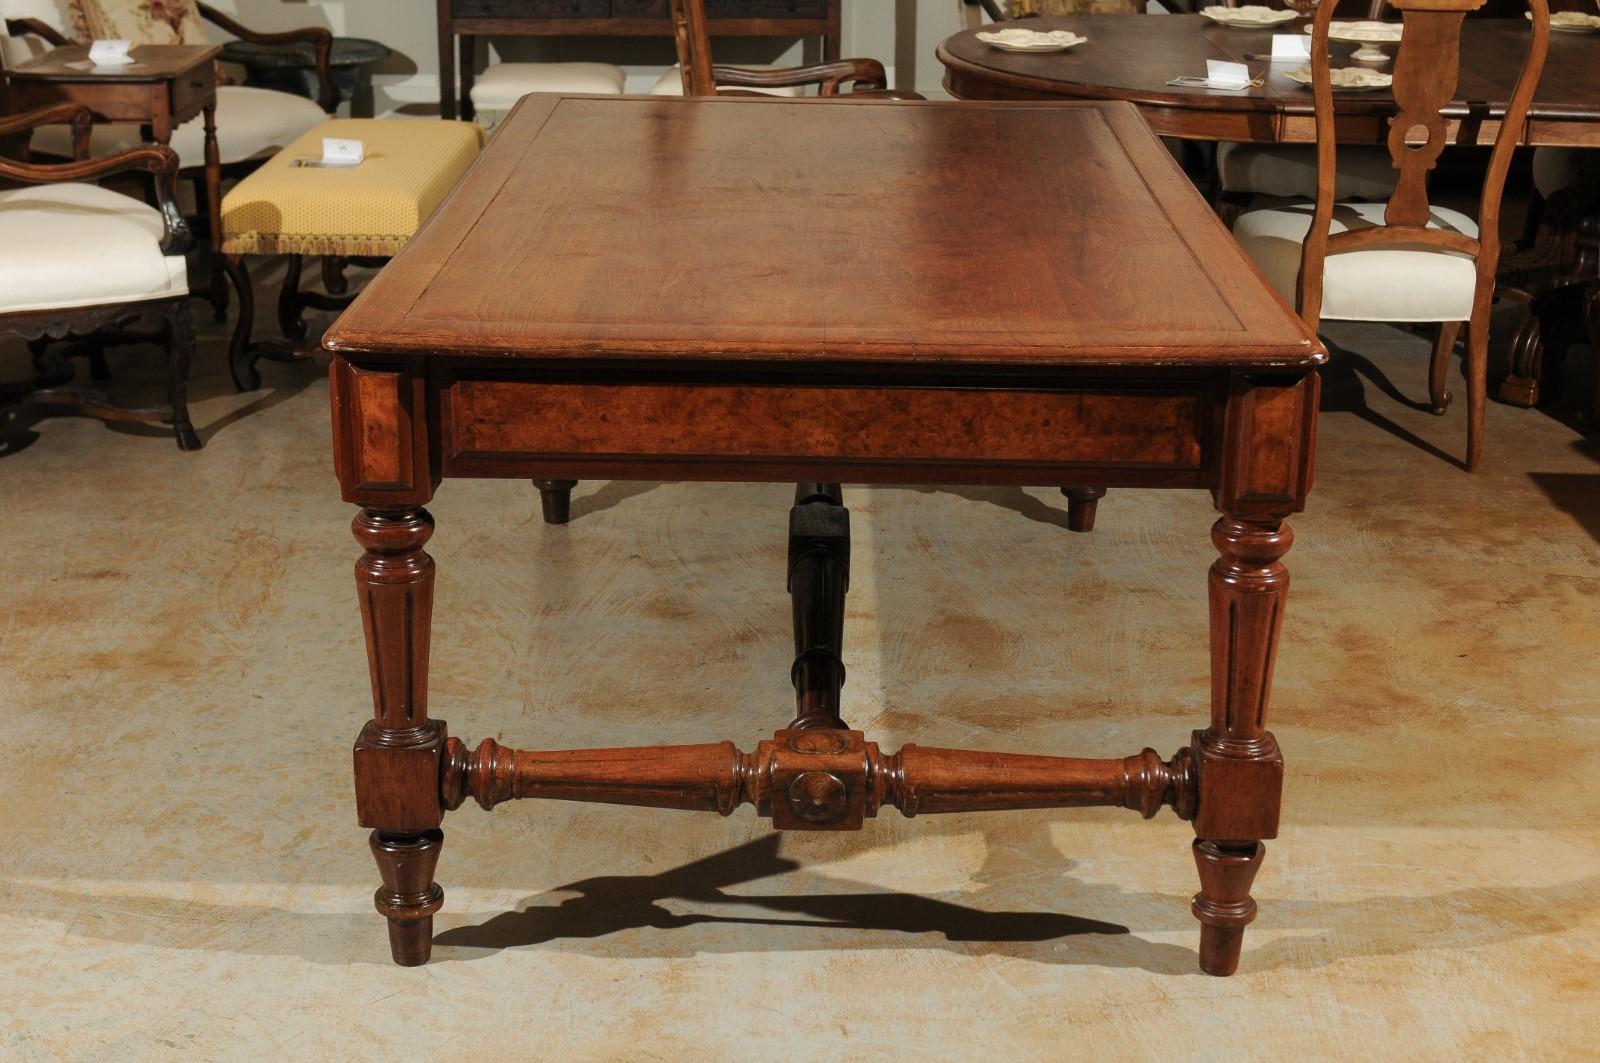 19th Century American Walnut Partners Desk with Six Drawers and Turned Legs 1